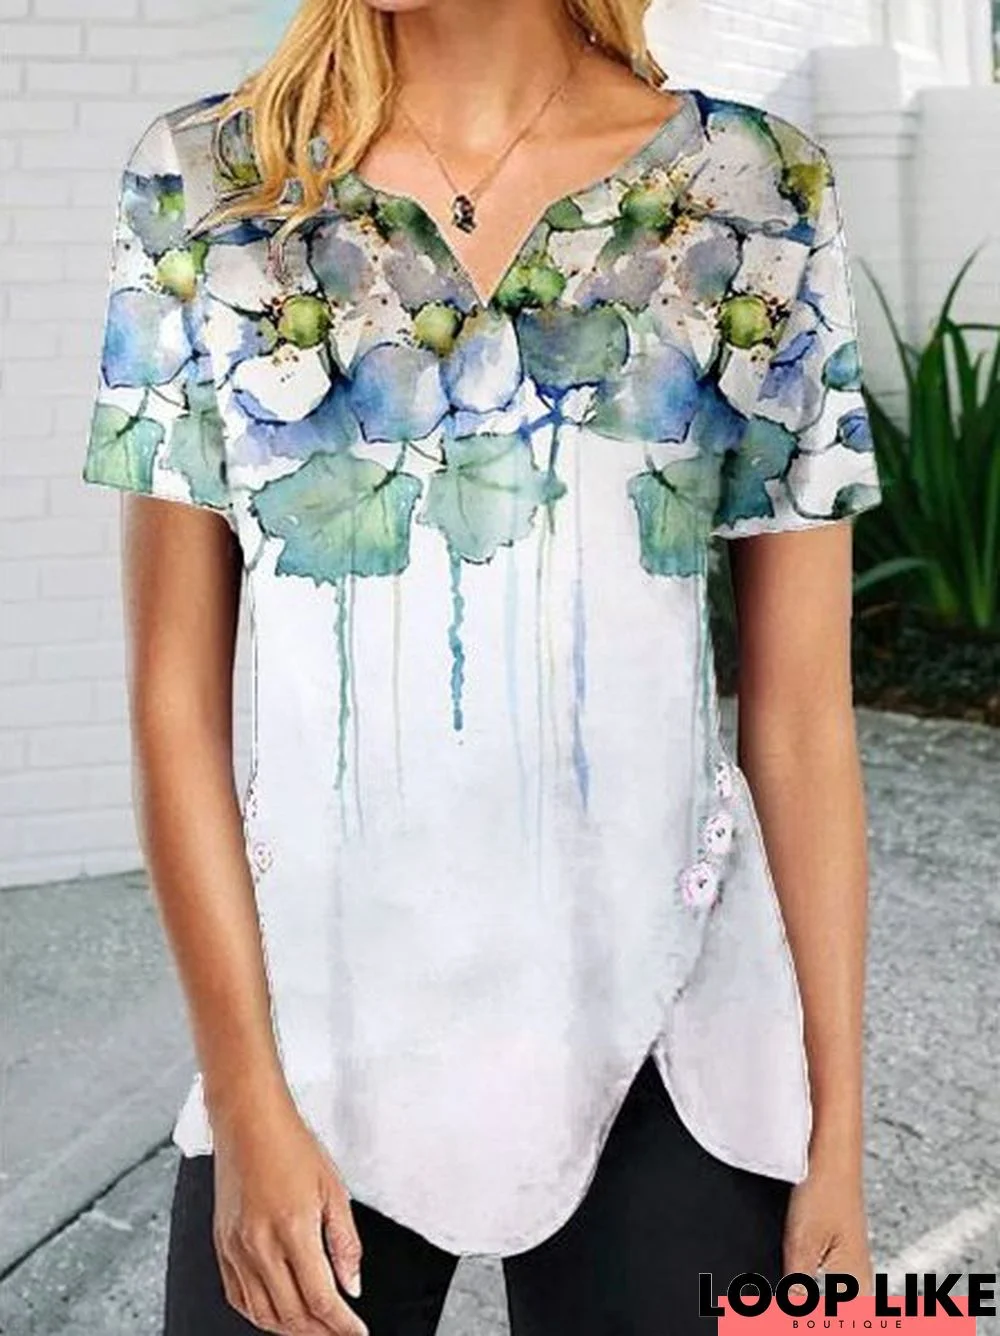 Floral Printed Cotton-Blend Casual Tunic T-shirt